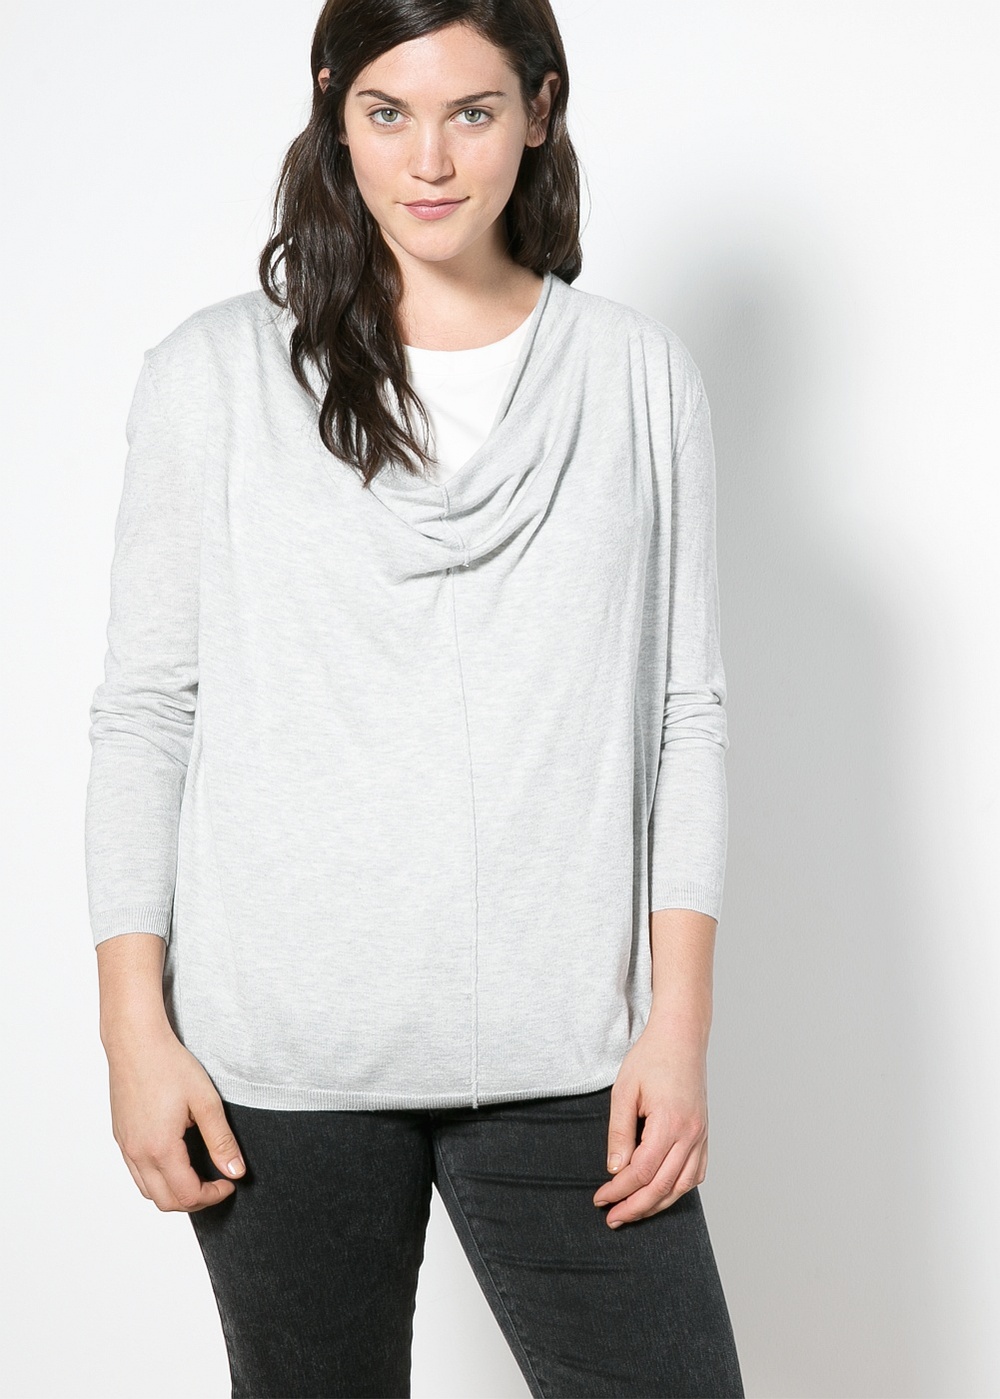  Simple neutral pieces are a perfect balance to more unique or daring pieces.  Draped neck sweater. Violeta by Mango. $59.99 